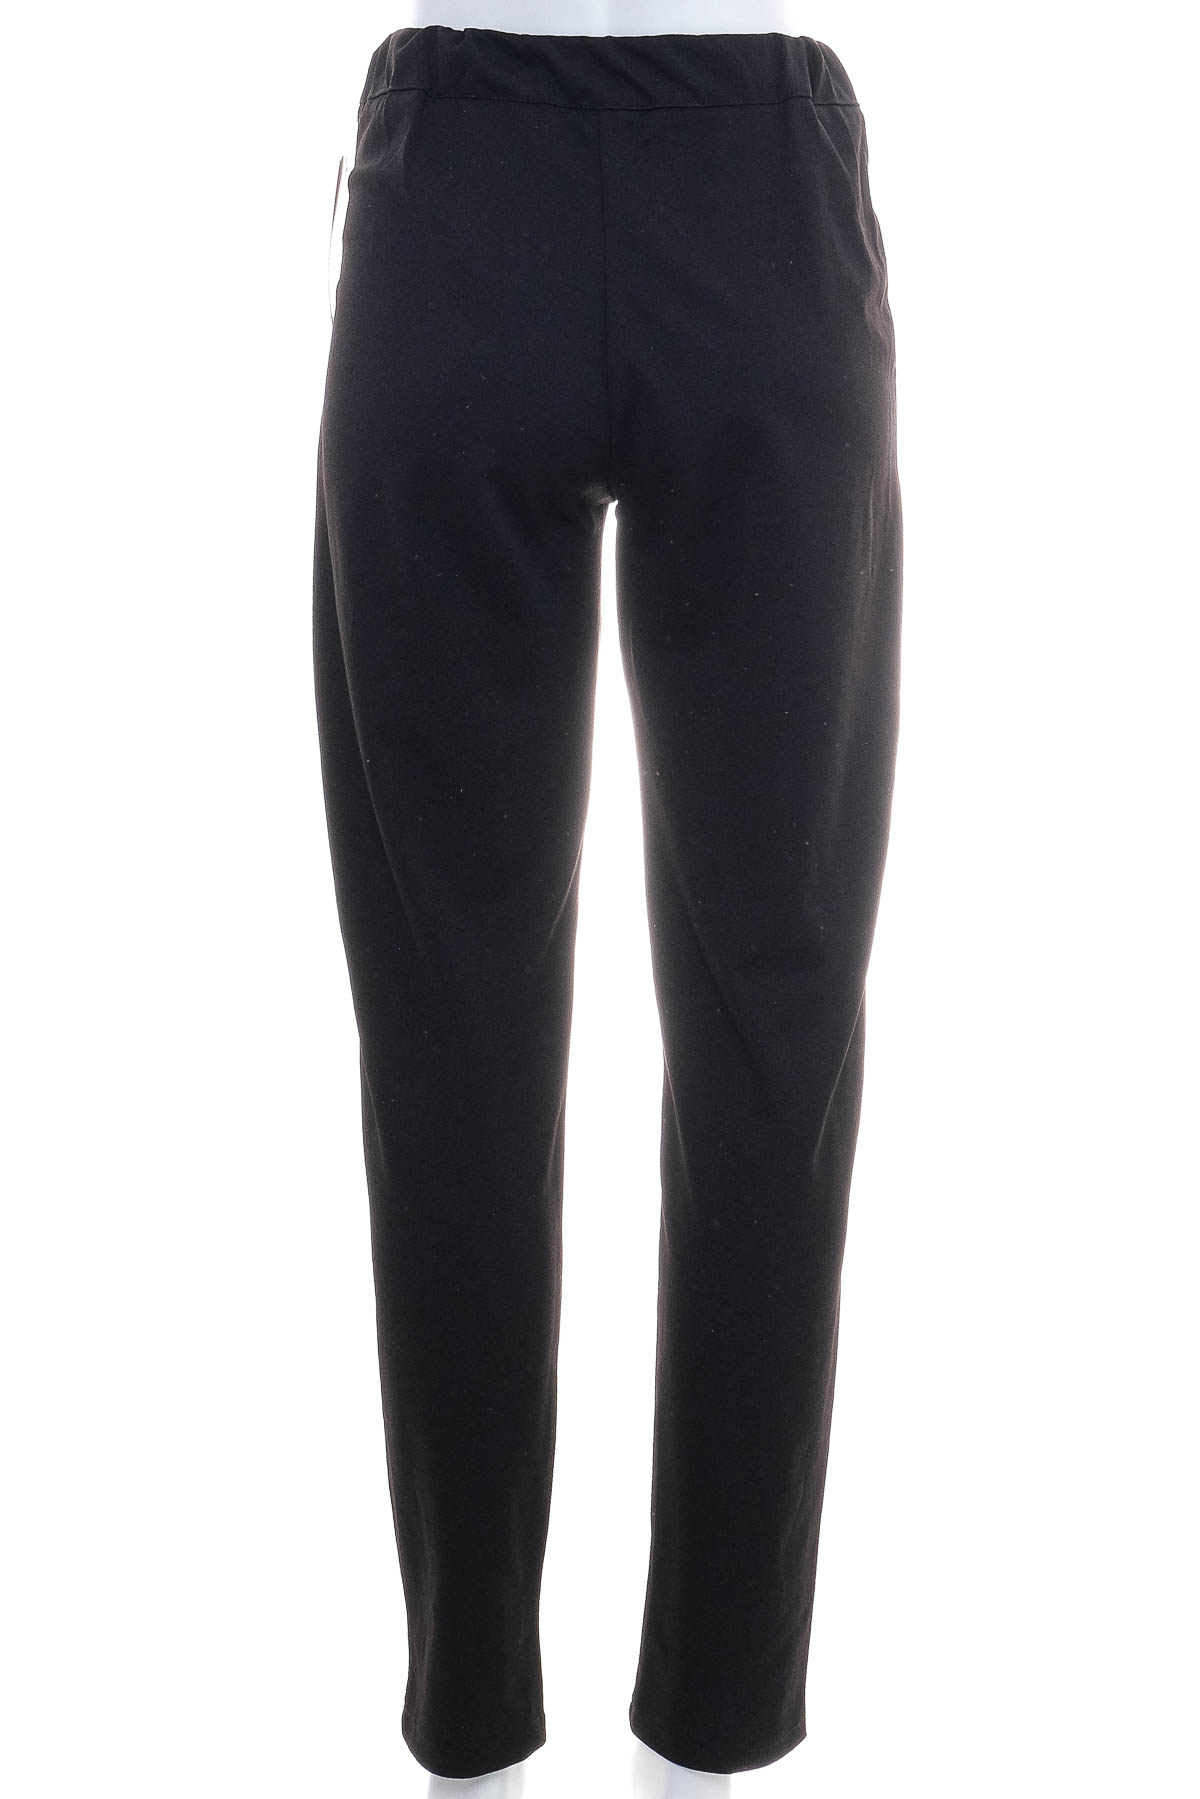 Women's trousers - New Collection - 1